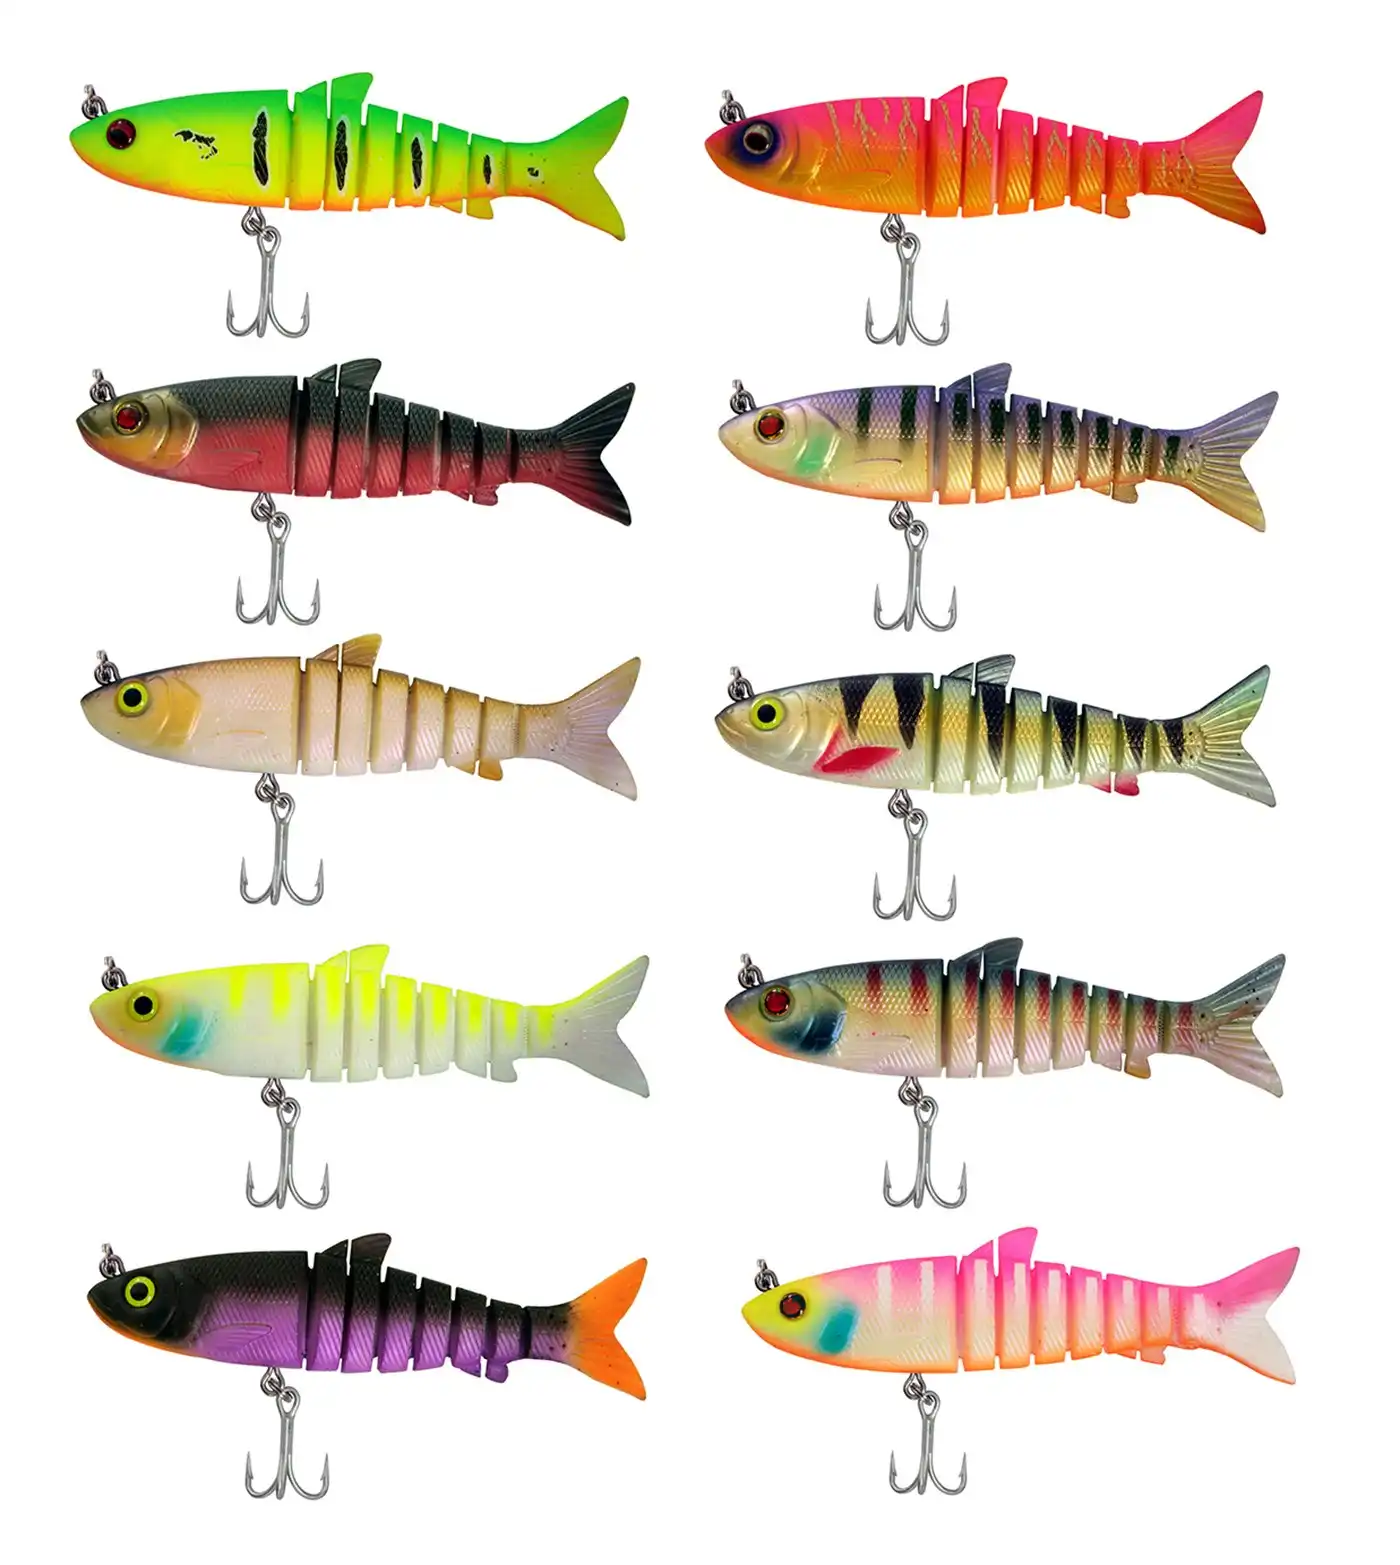 220mm Zerek Affinity Jointed Swimbait Fishing Lure with Removeable